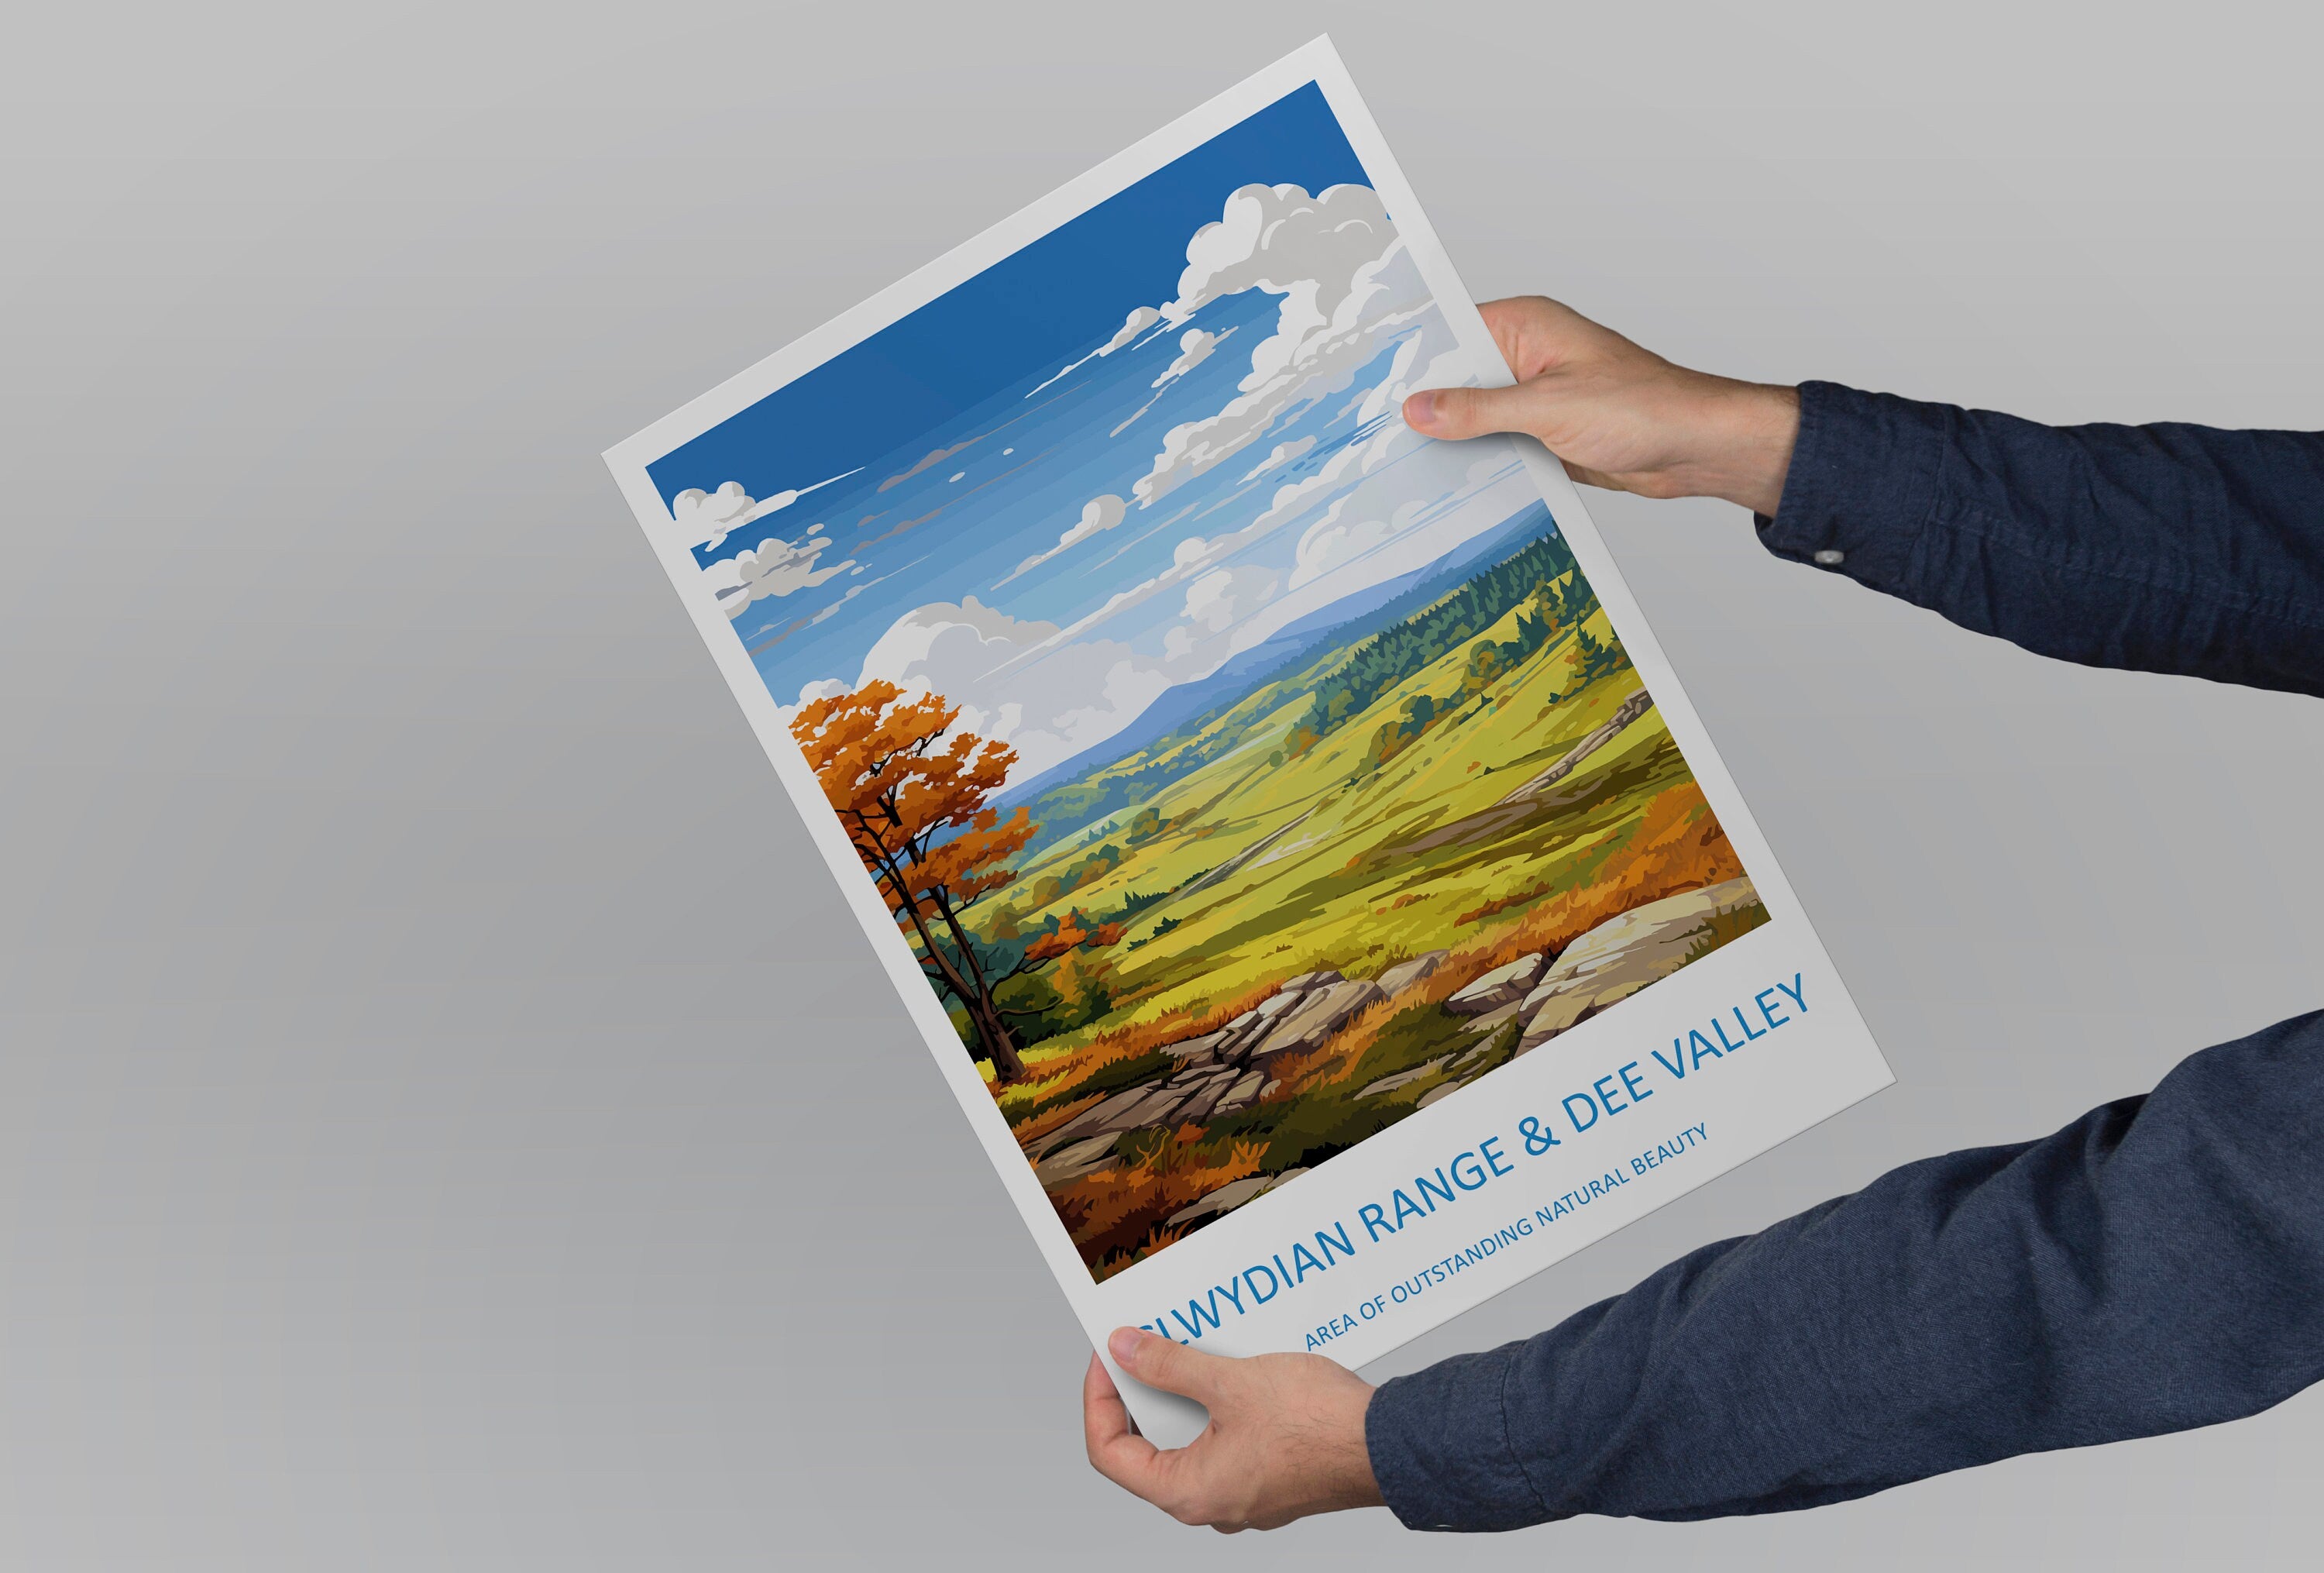 Clwydian Range and Dee Valley Travel Print Wall Art Clwydian Range and Dee Valley Wall Hanging Home Decor Clwydian Range and Dee Valley AONB